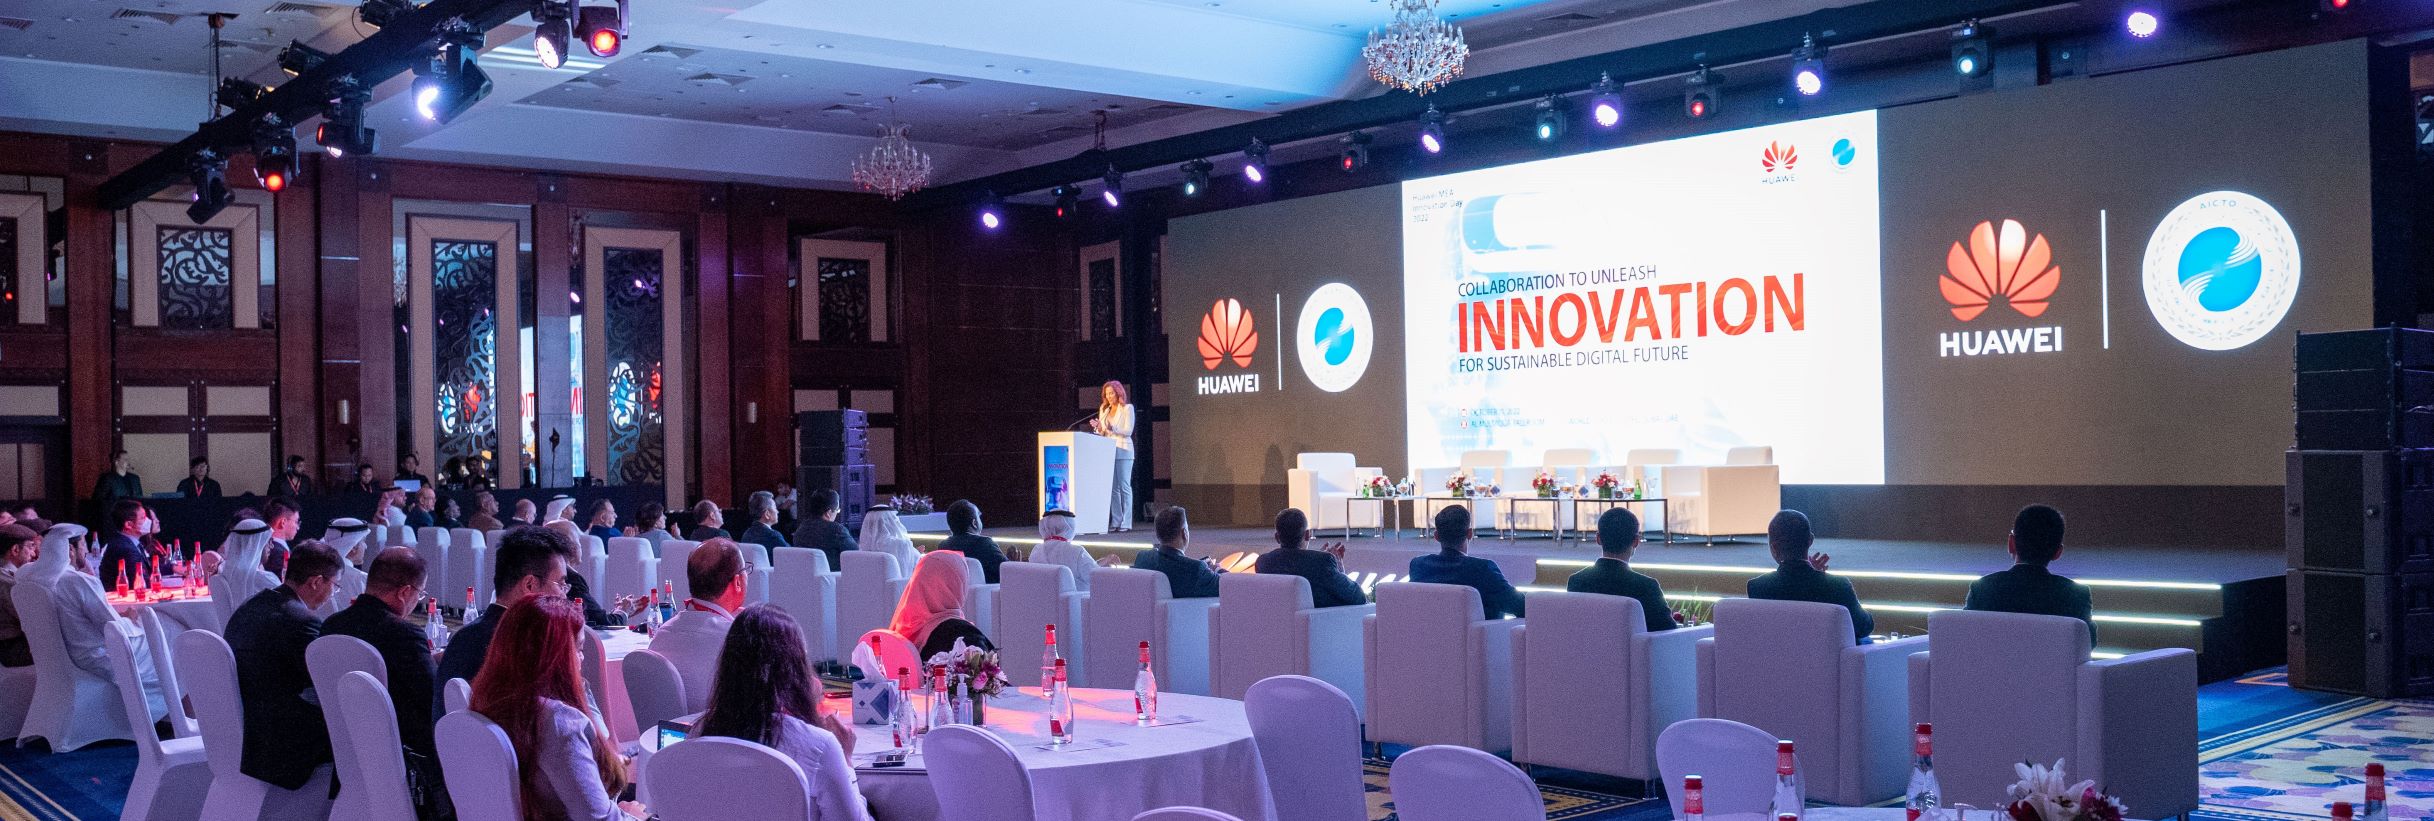 2nd Annual edition of Huawei Innovation Day discussed how collaboration can unleash innovation for a sustainable digital future in MENA